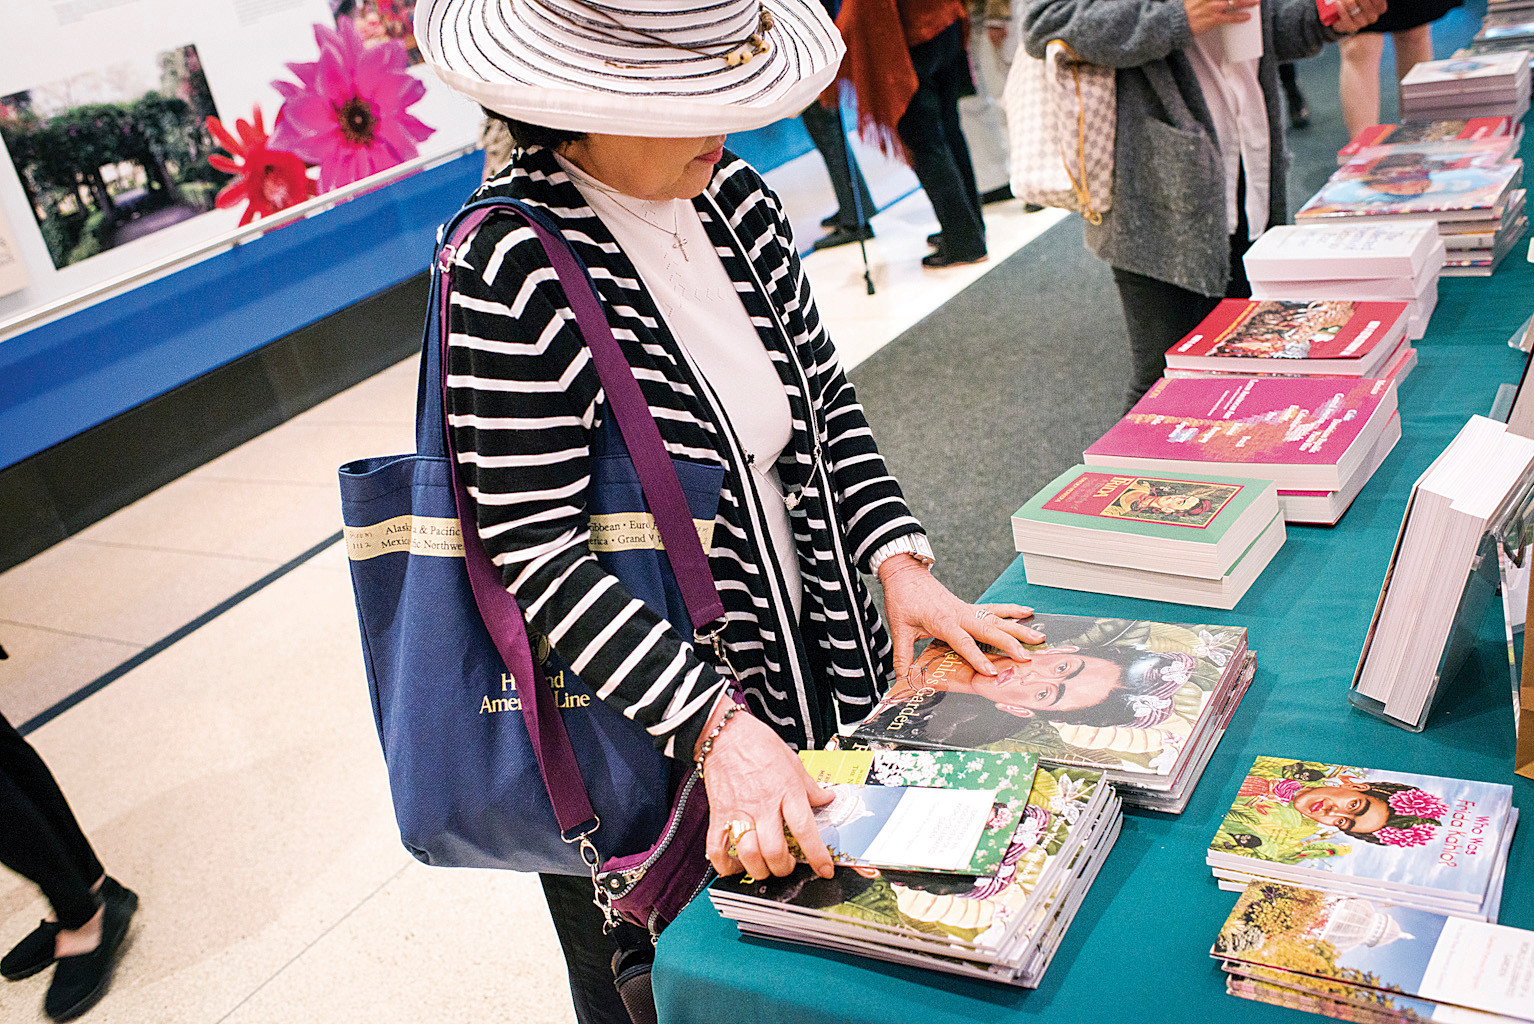 New York Botanical Garden members view the Frida Kahlo books for sale before a panel discussion on Mexican Art in the Ross Auditorium.